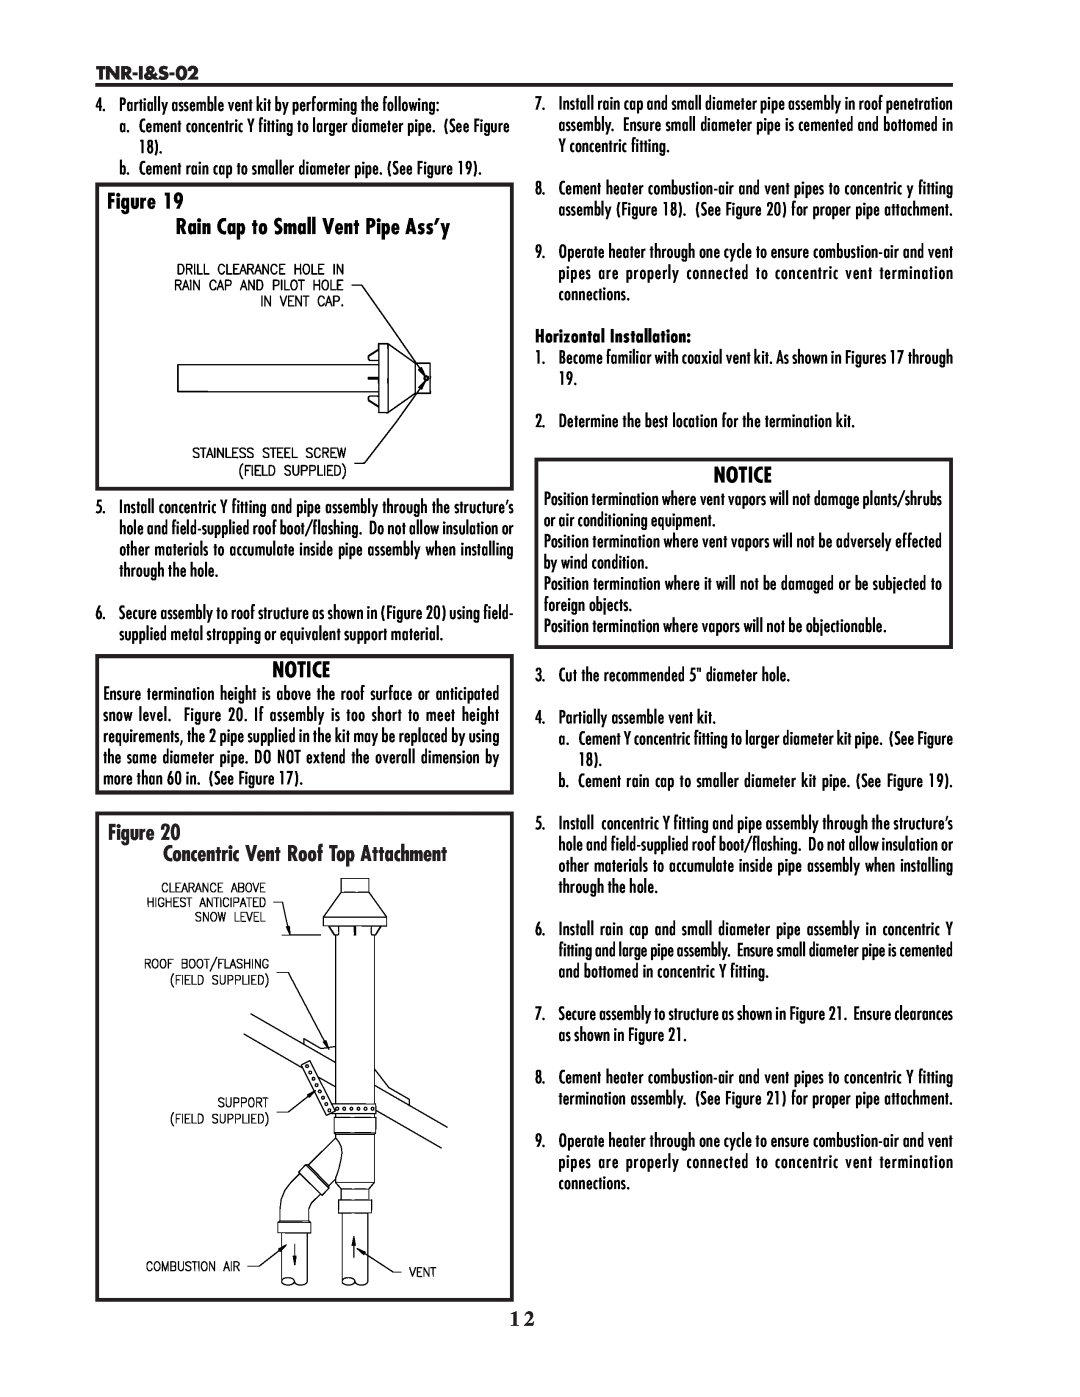 Lochinvar TNR-I&S-02 service manual Figure Rain Cap to Small Vent Pipe Ass’y, Concentric Vent Roof Top Attachment 